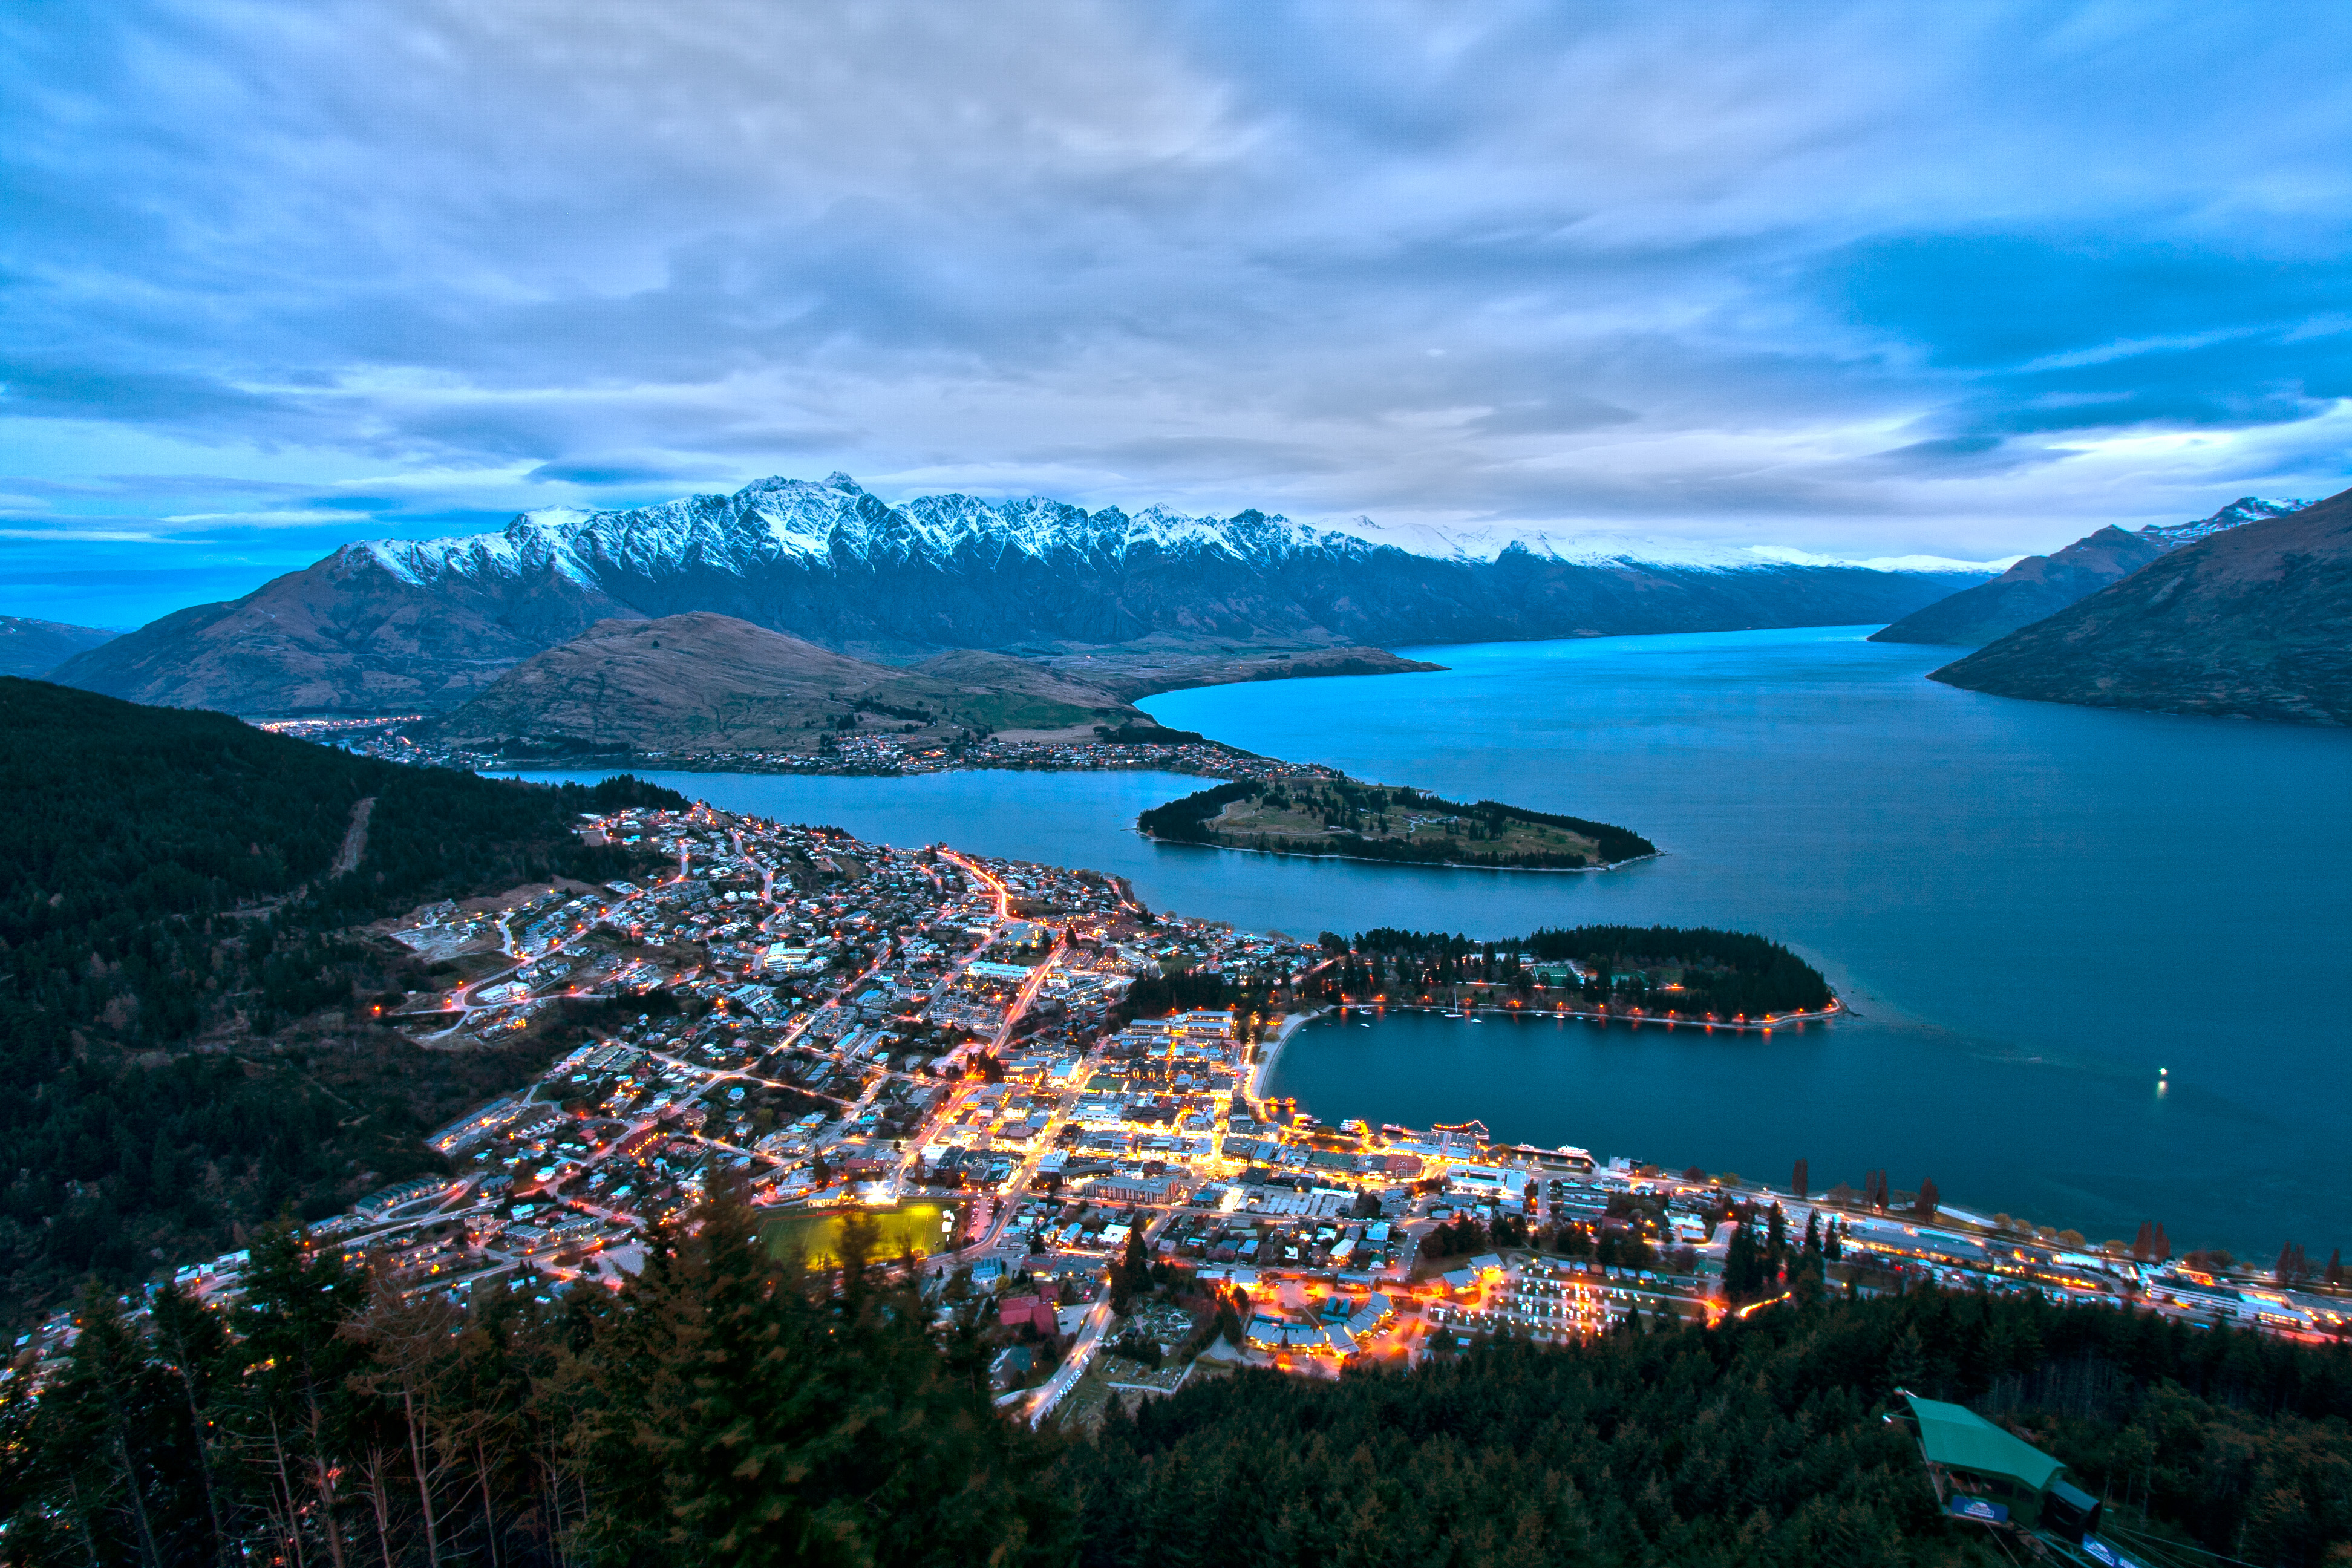 Skycity Granted Approval To Buy Land For New Five Star Queenstown Hotel Iag